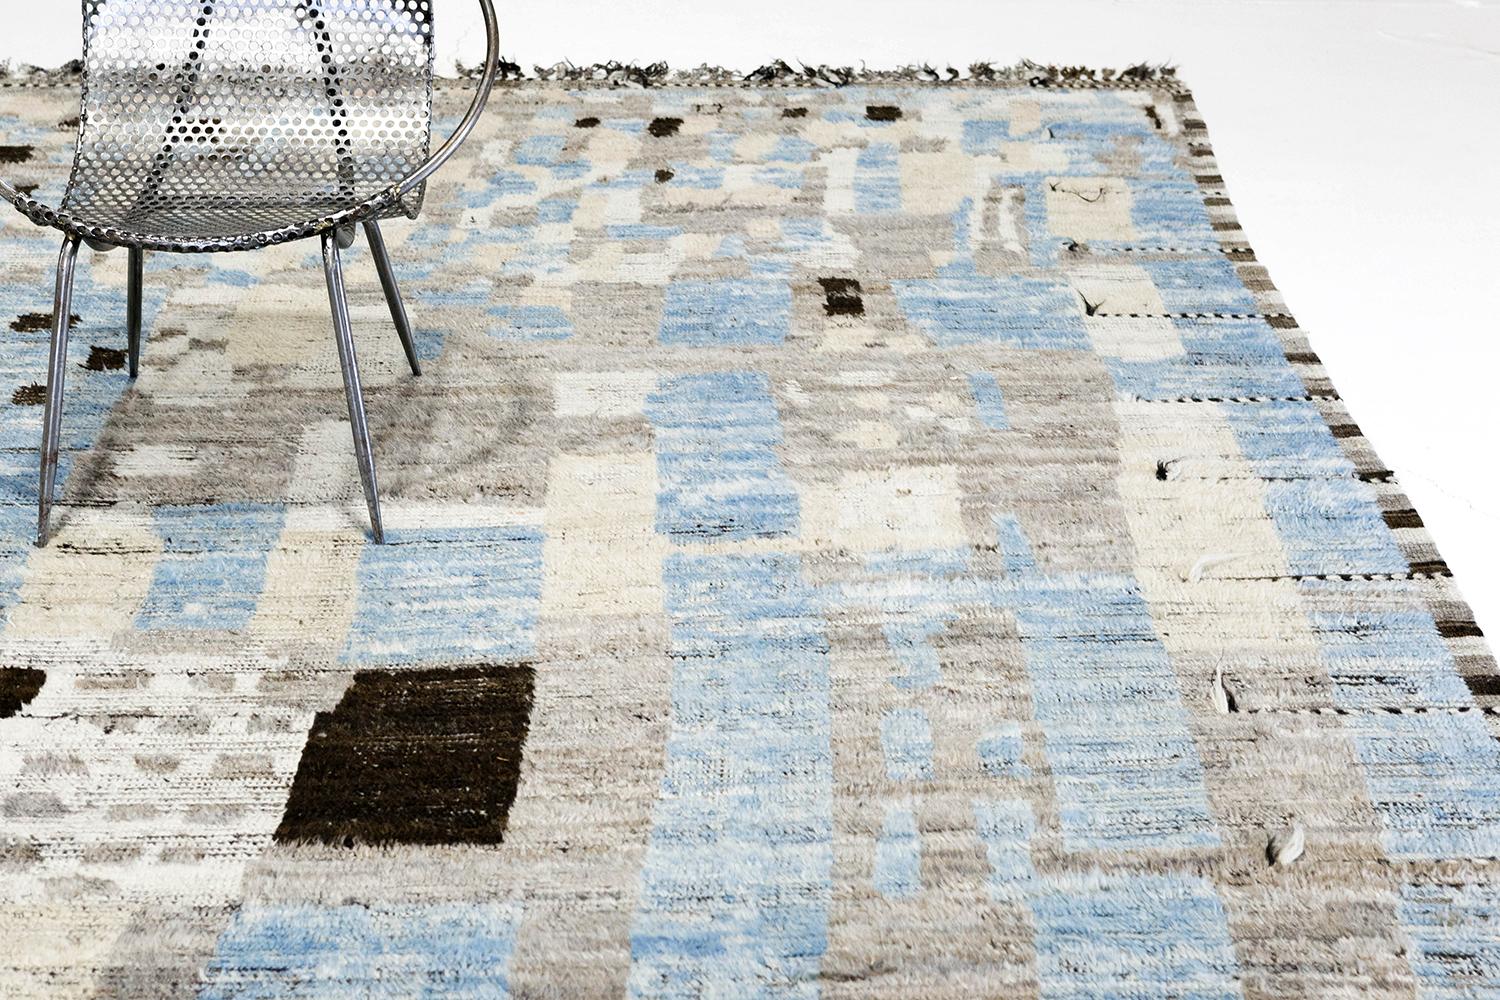 'Tetouan' is a beautifully textured wool shag combining unique design elements for the modern design world. Its weaving of natural earth tones wuth vibrant blues and playfulness with shapes is suitable for many interiors and is what makes the Atlas